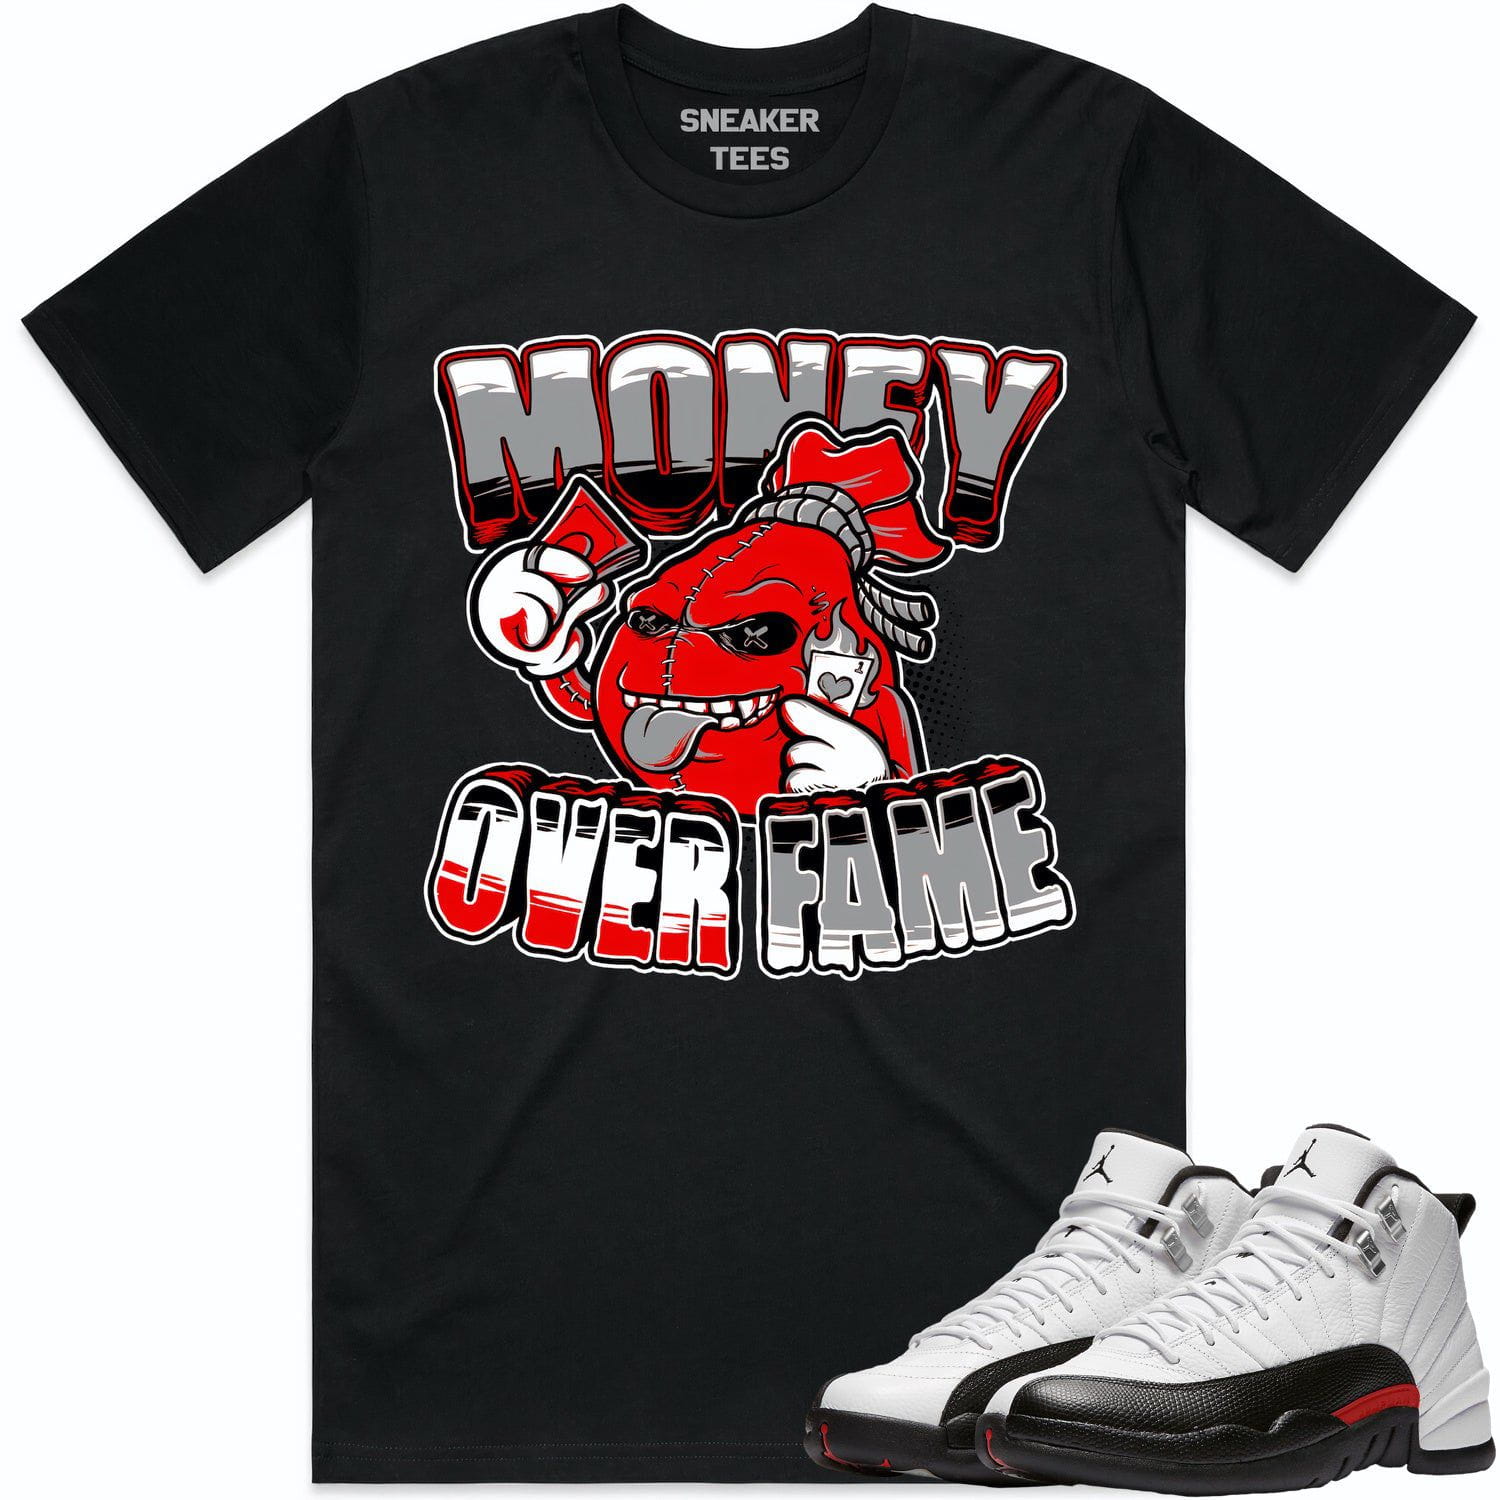 Red Taxi 12s Shirt - Jordan Retro 12 Red Taxi Shirts - Money Over Fame